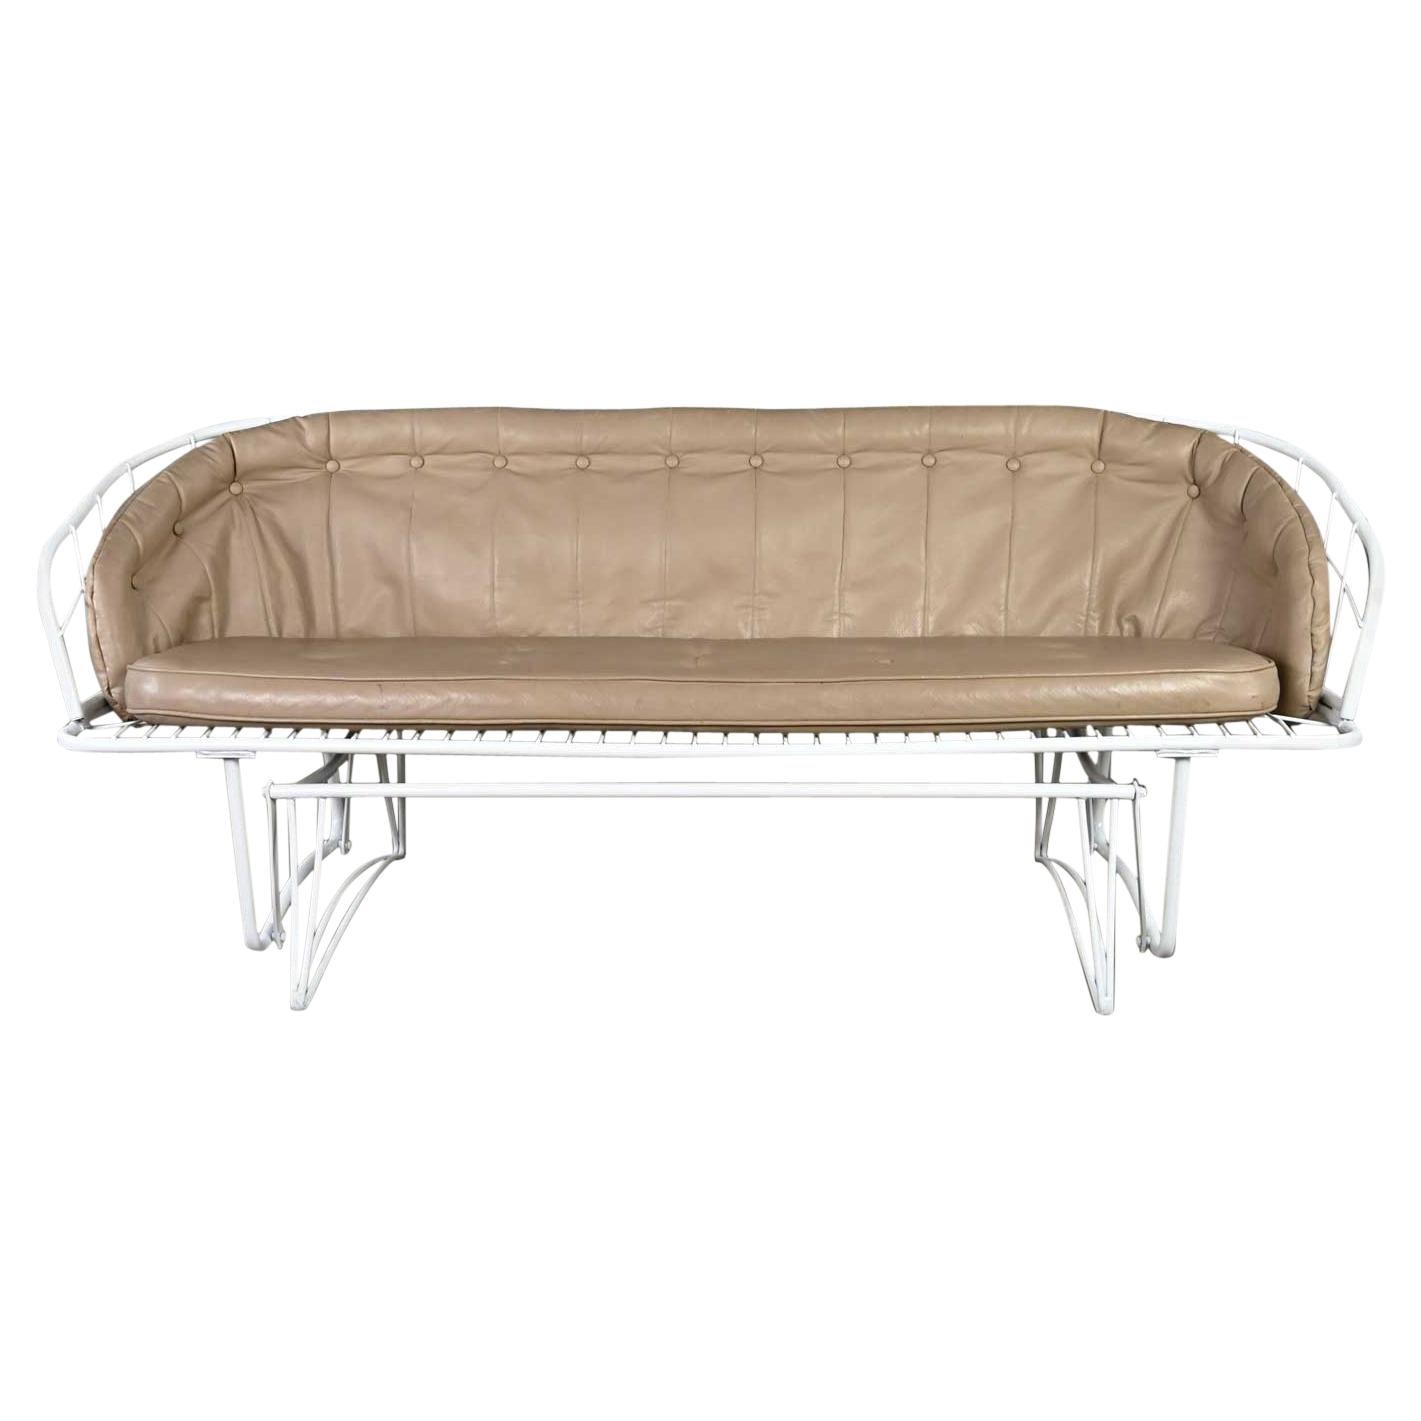 MCM Homecrest White Painted Metal Glider & Taupe Vinyl Cushions & Button Detail